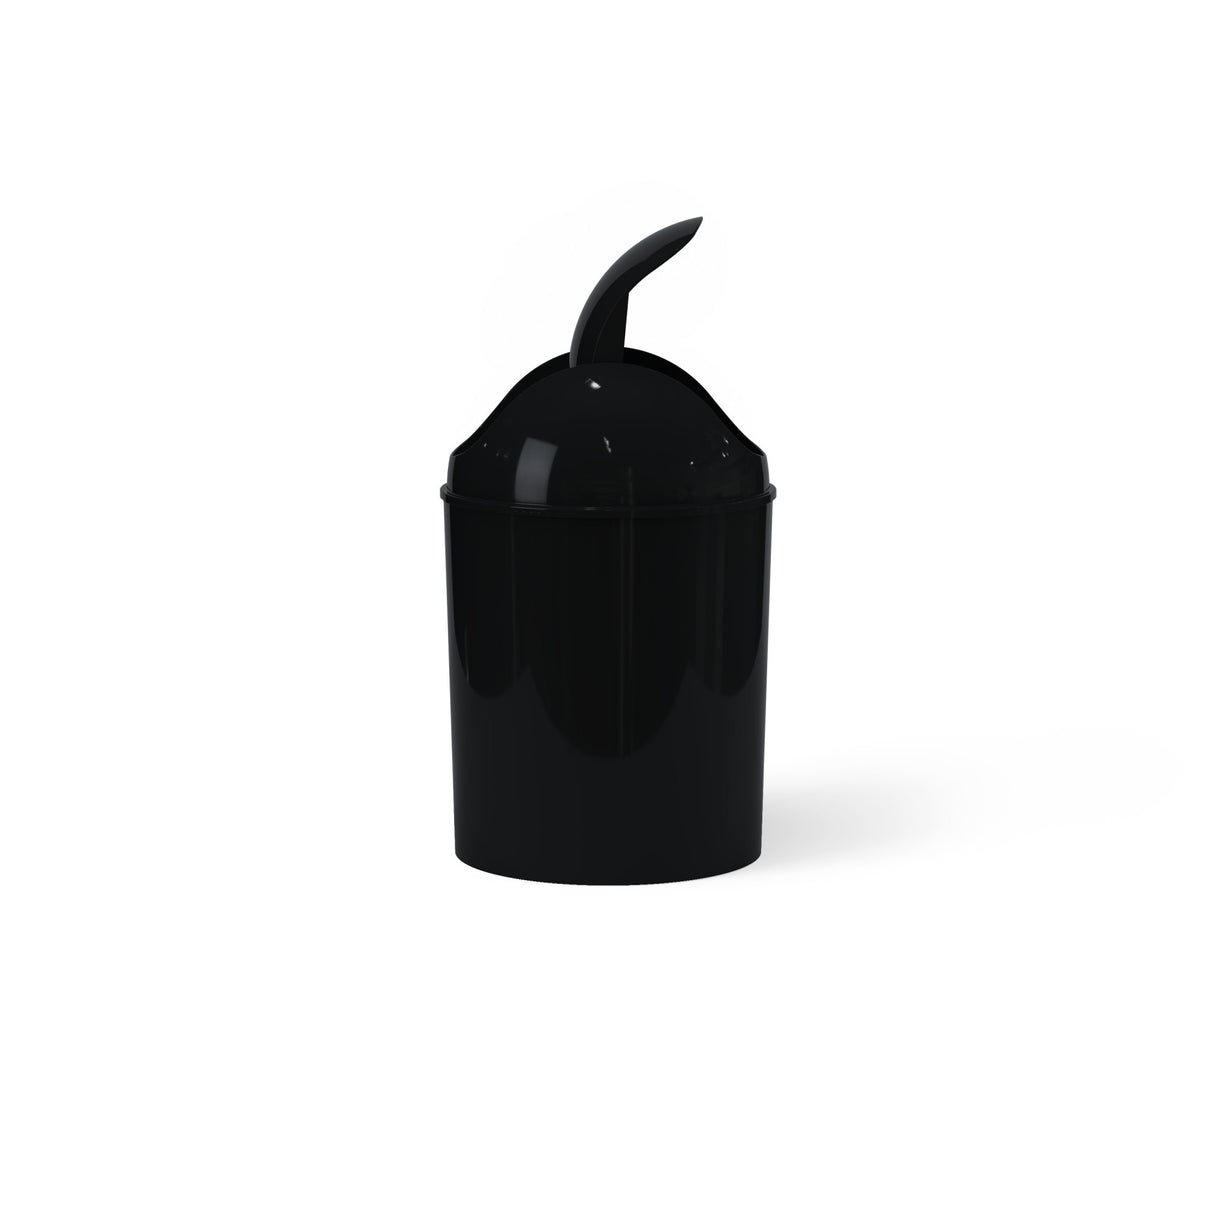 Umbra Mini Waste Can with Swing Lid, Matte Black, 1.5 gal